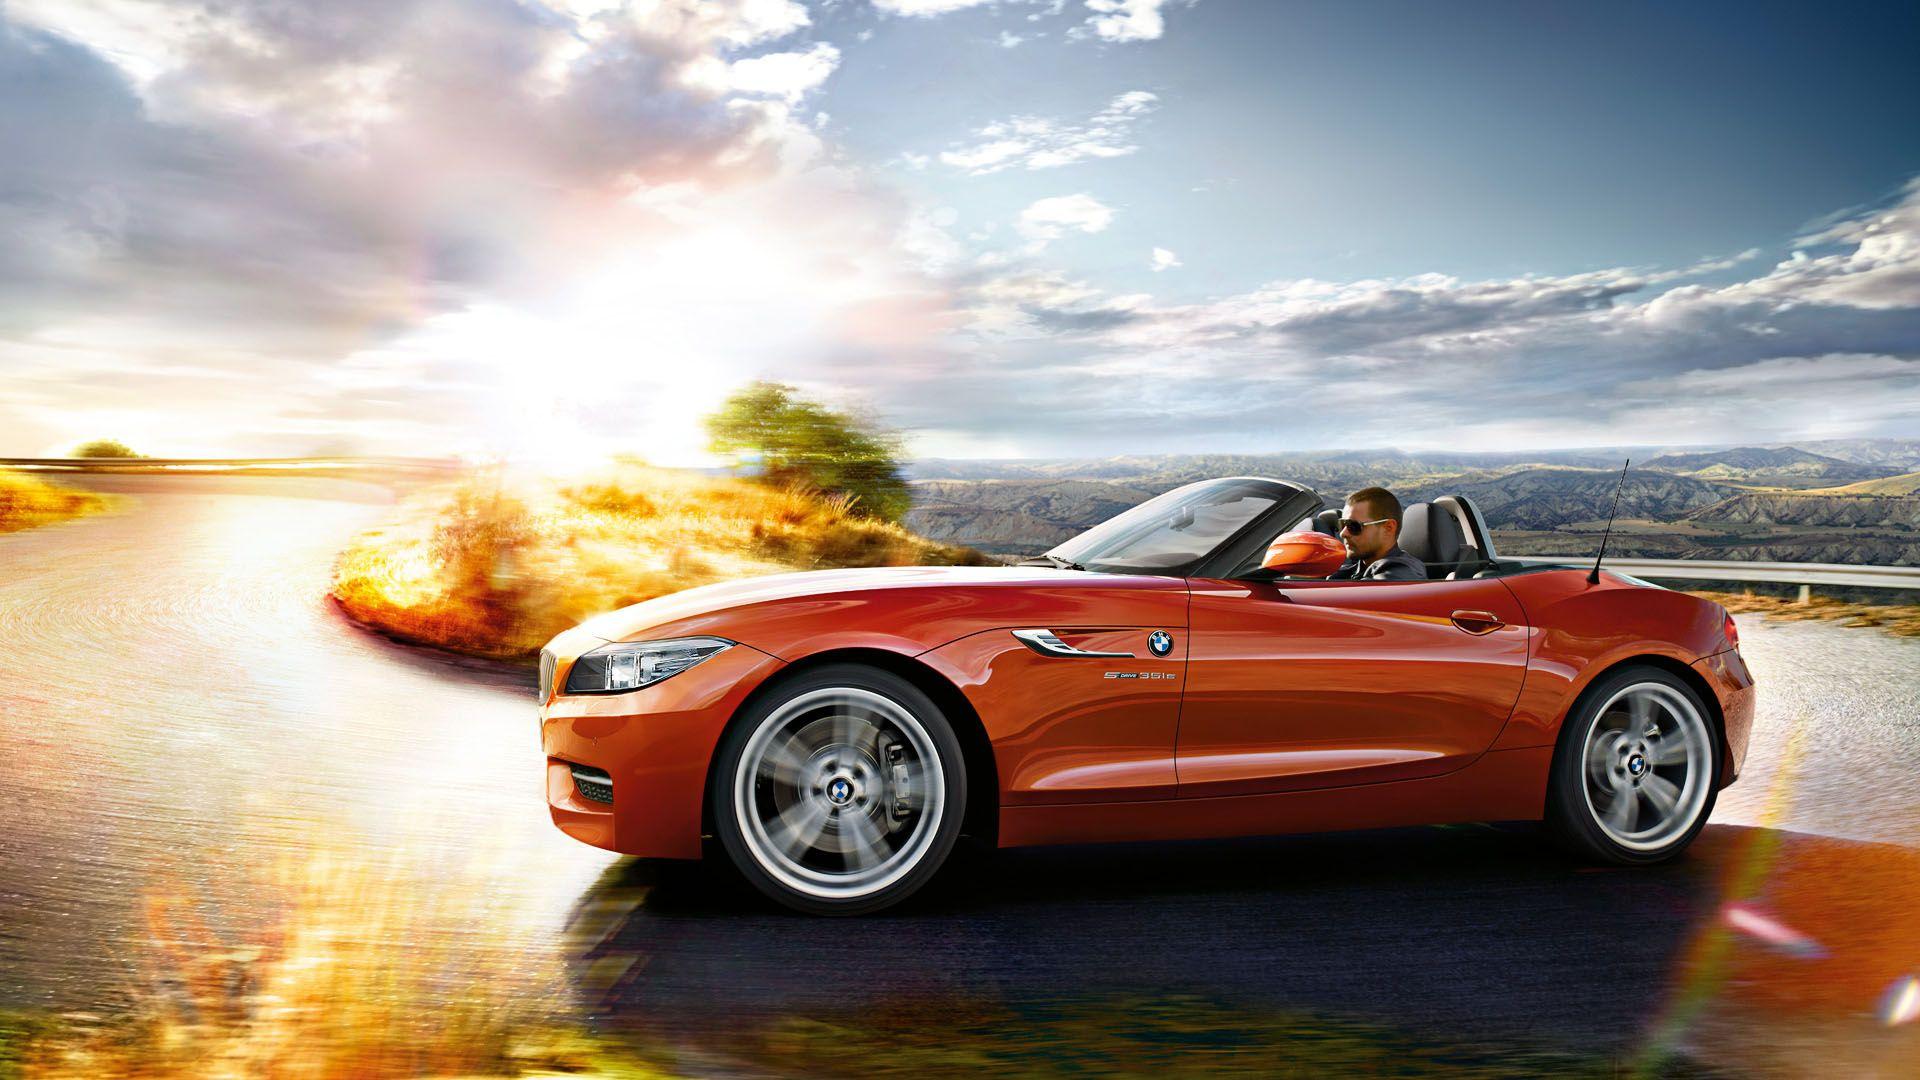 BMW Z4 Wallpaper, HD Wallpaper available in different resolution